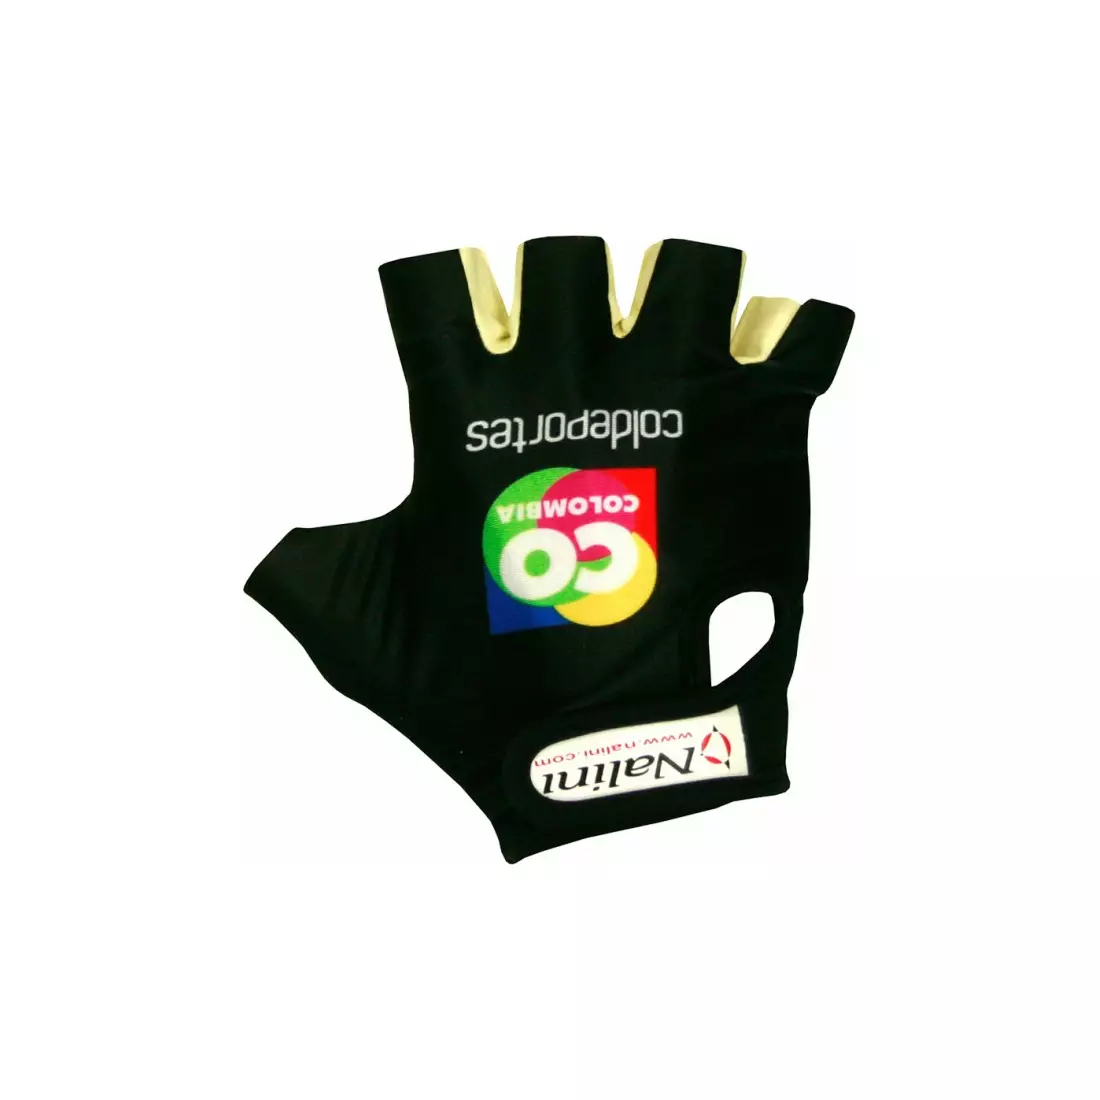 NALINI - TEAM COLOMBIA 2014 - cycling gloves